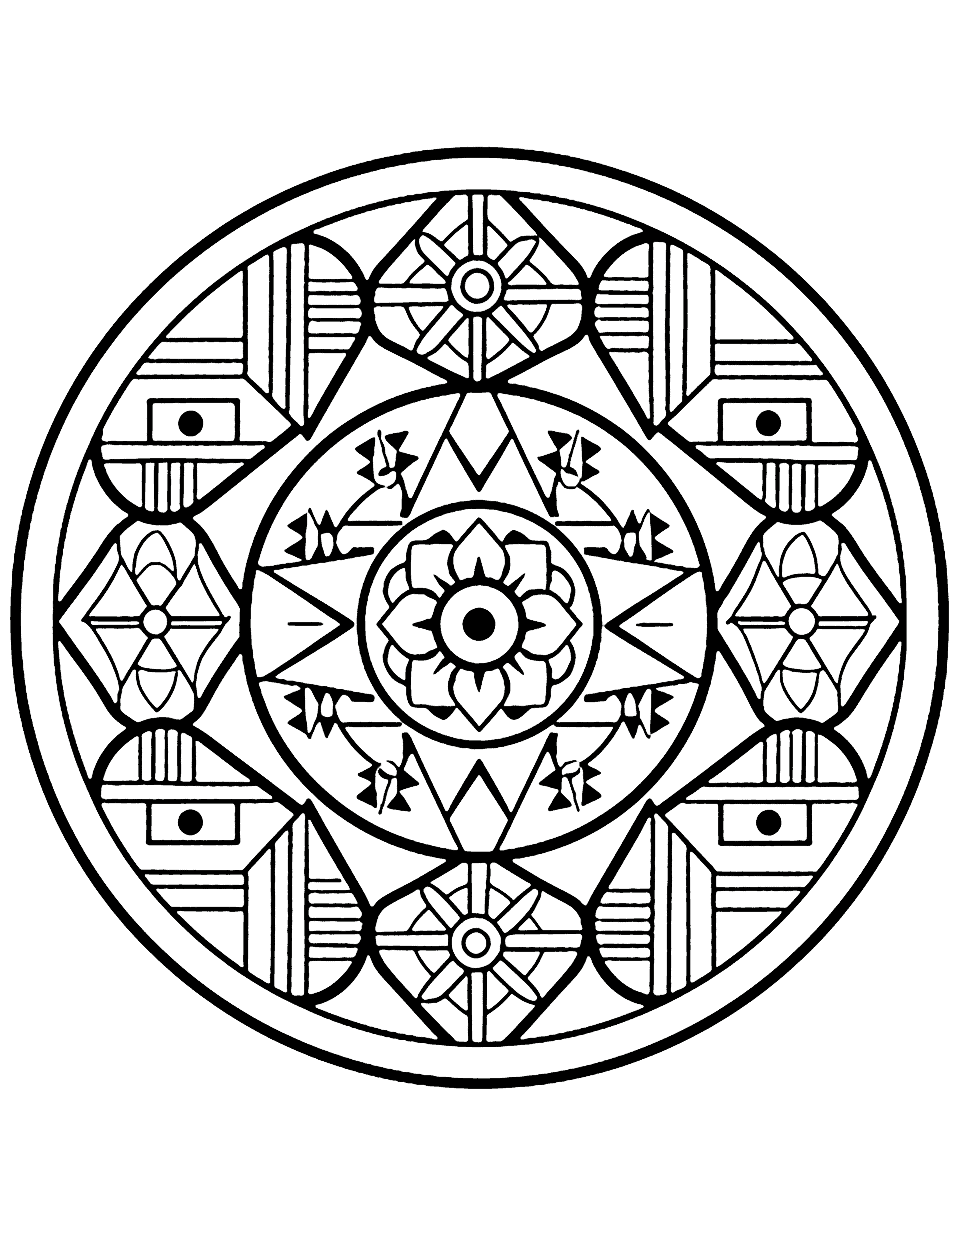 Happy Holidays Mandala Coloring Page - A festive mandala filled with Christmas trees, snowmen, and gifts, perfect for the holiday season.